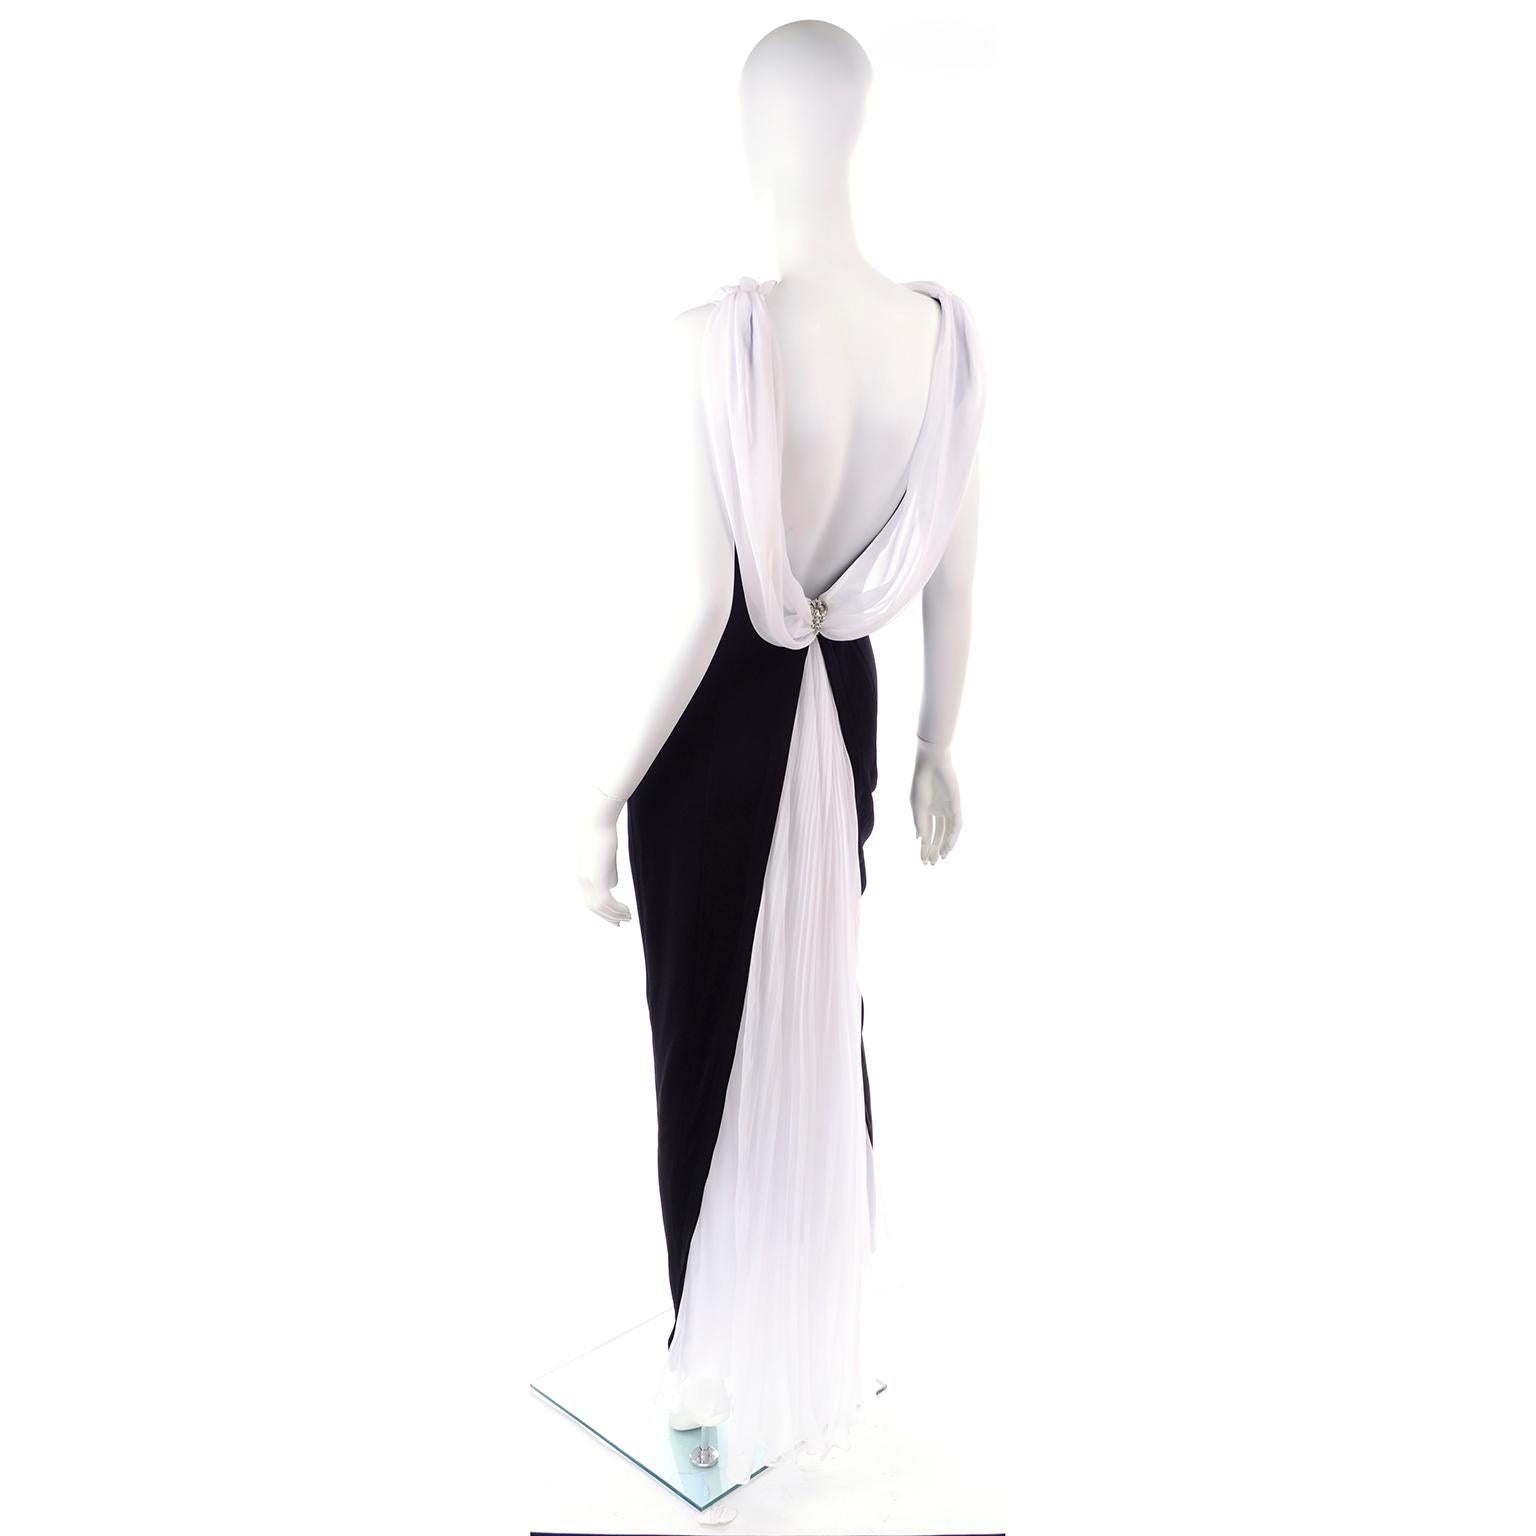 This is a lovely vintage black evening gown by Tadashi Shoji with a dramatic, deep, low open back and beautiful white chiffon pleated drape that goes to the floor like a train. This dress was made in the USA in the 1990's and we estimate it to fit a